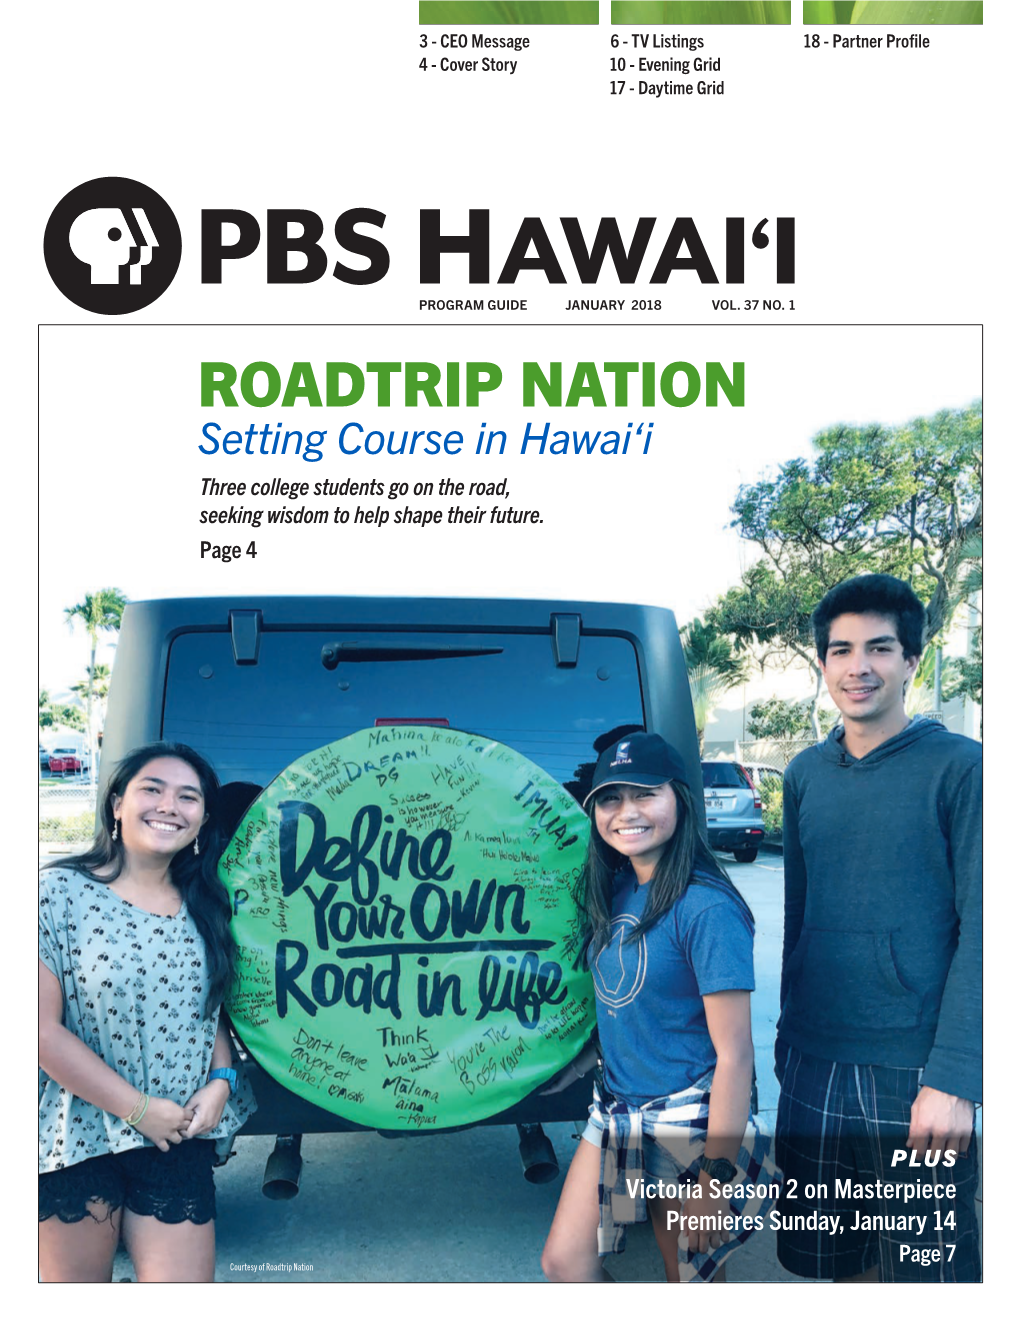 ROADTRIP NATION Setting Course in Hawai‘I Three College Students Go on the Road, Seeking Wisdom to Help Shape Their Future